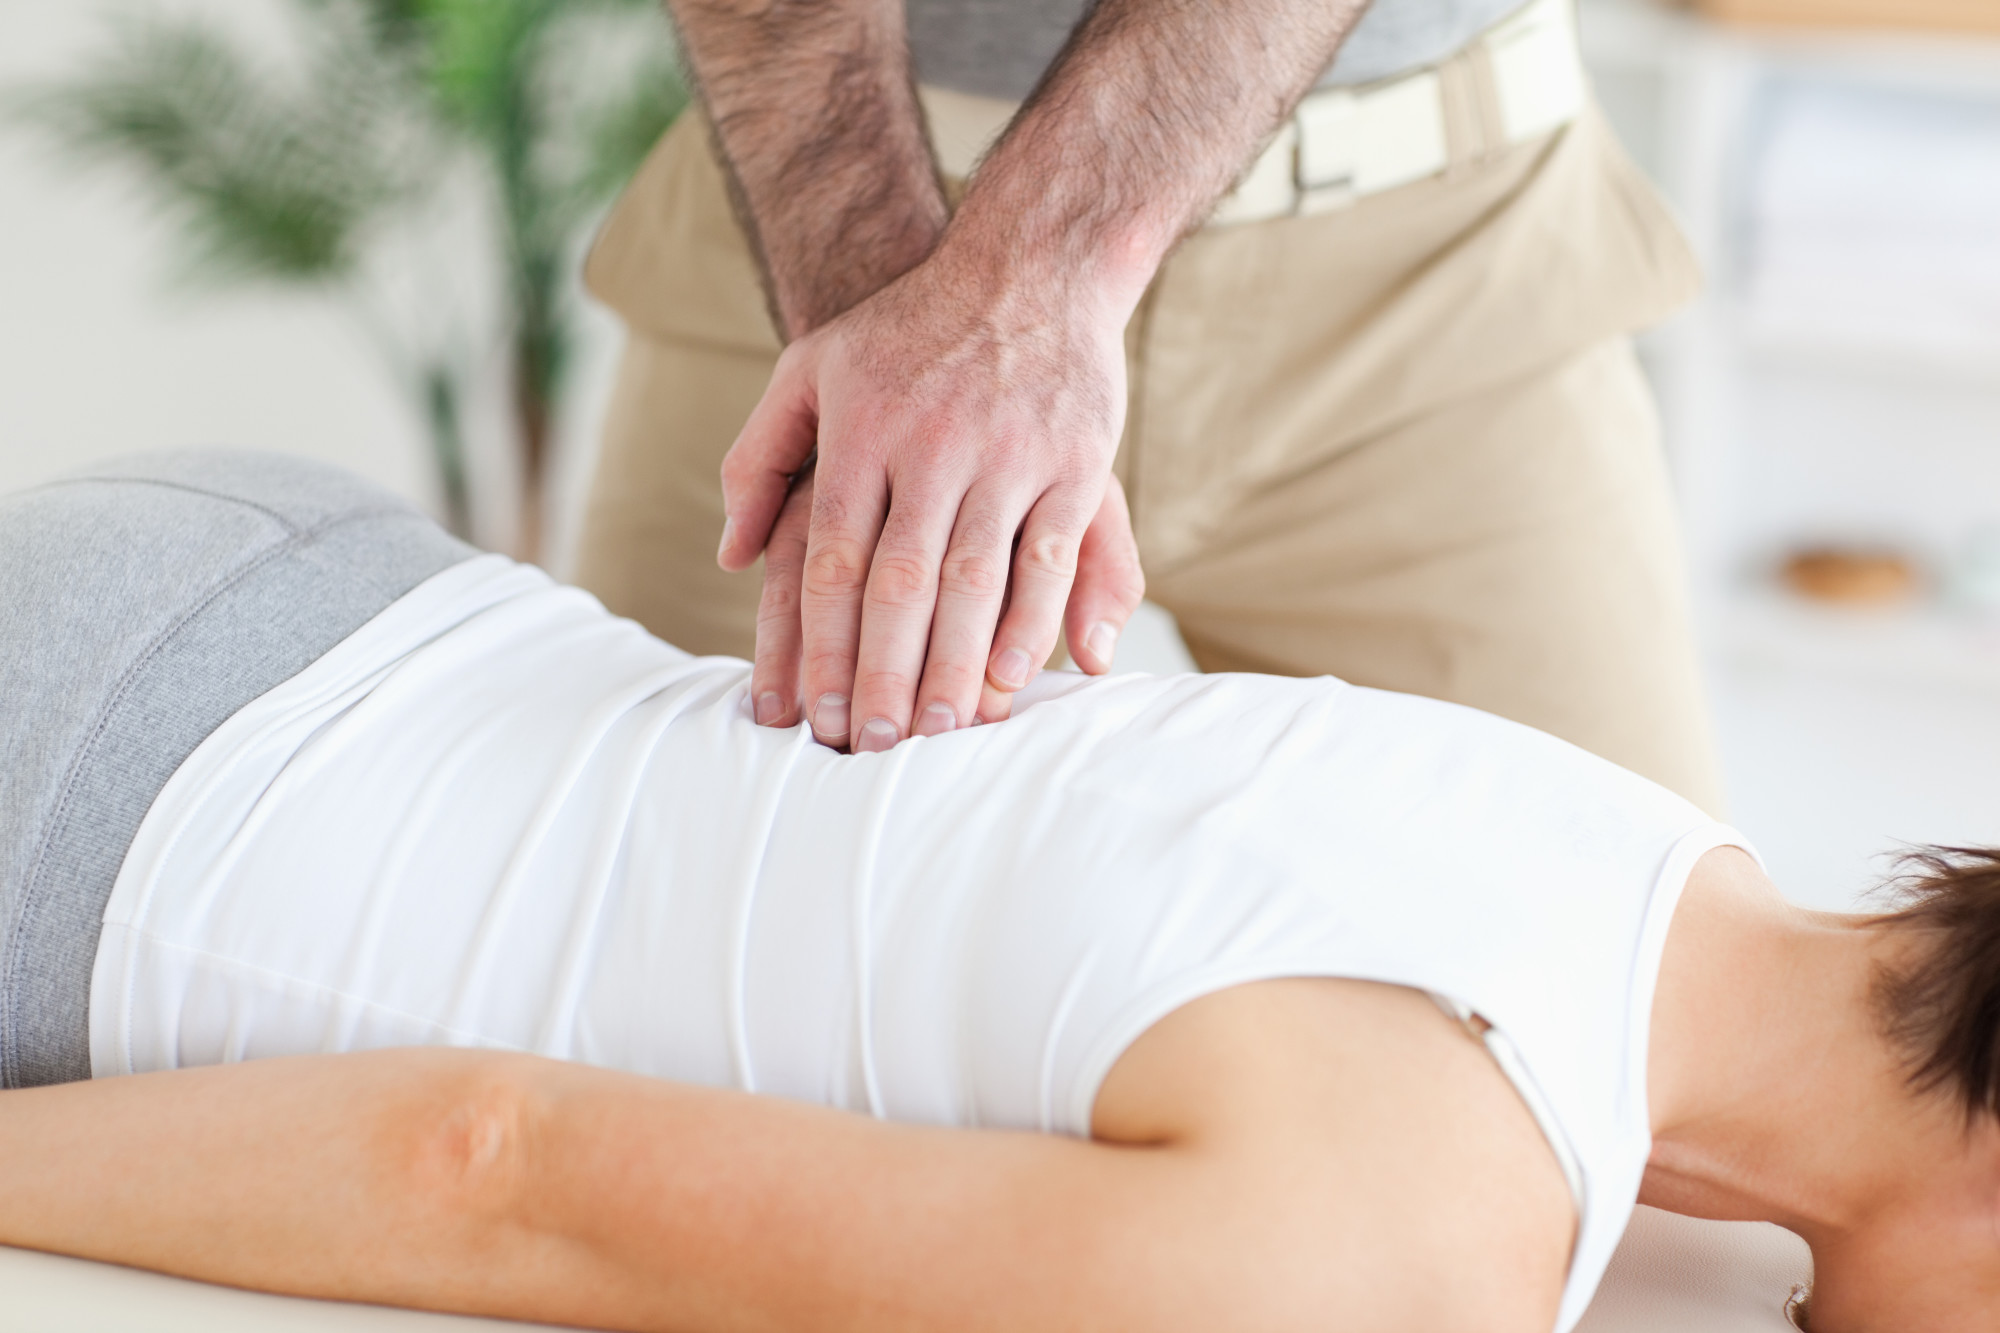 Are you on the hunt for a reliable and experienced chiropractor to provide you with treatment? This is how to choose the best chiropractor in your area.